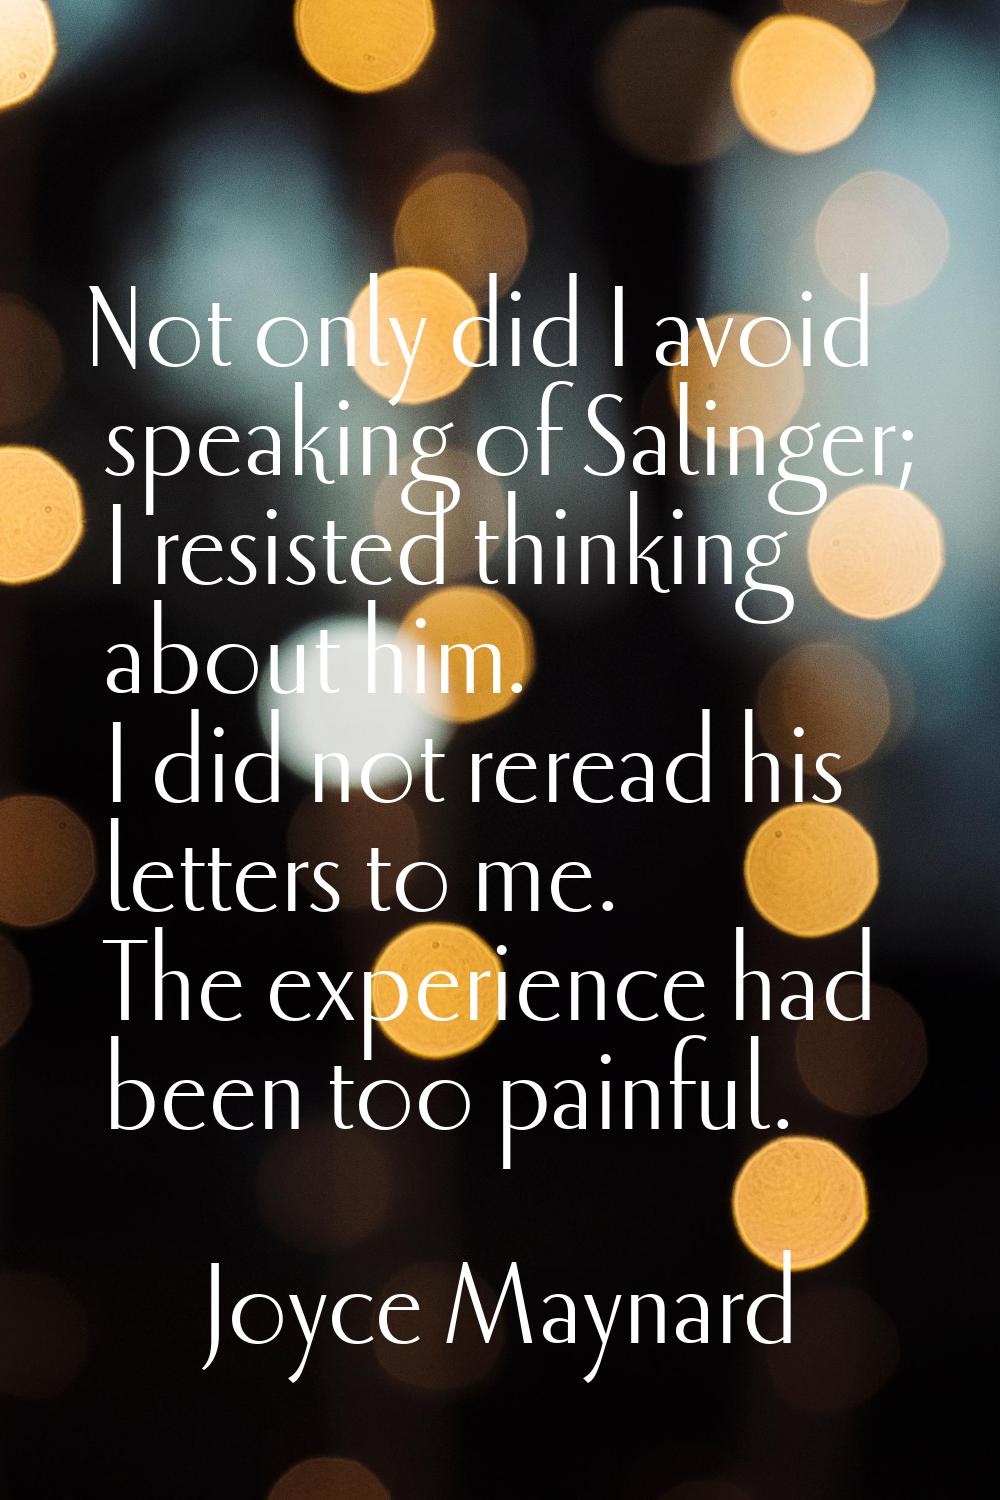 Not only did I avoid speaking of Salinger; I resisted thinking about him. I did not reread his lett